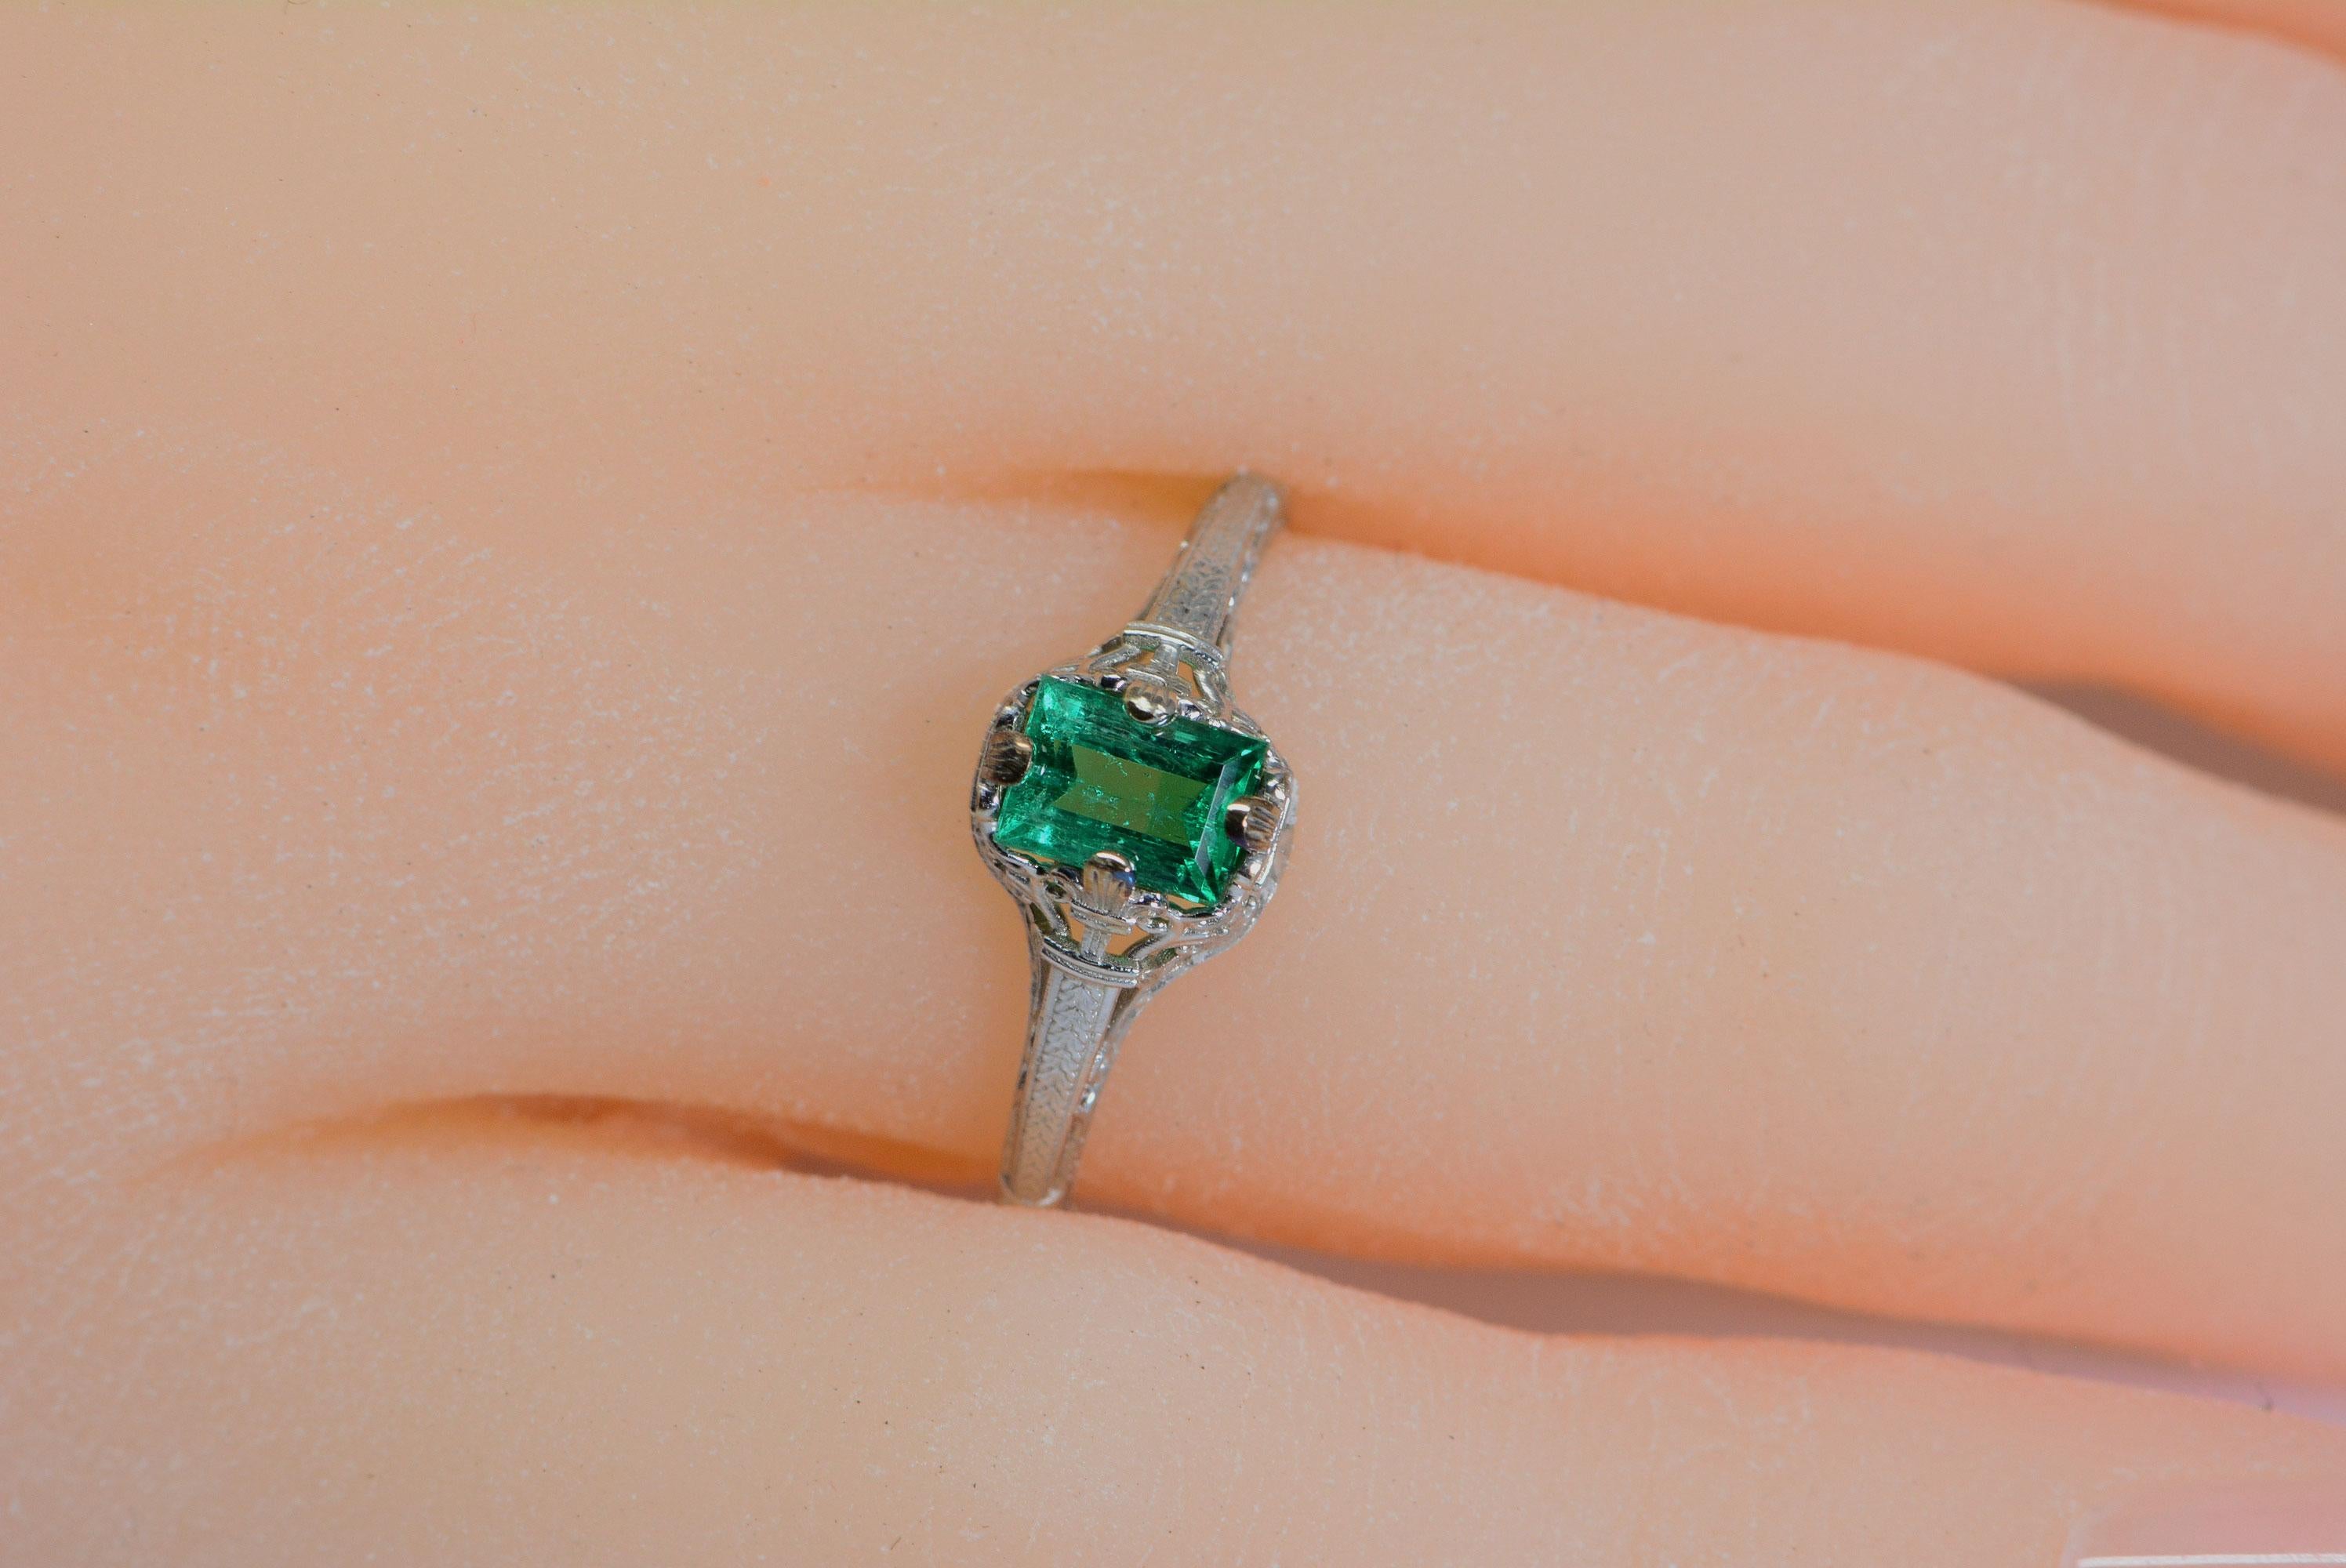 The columbian emerald in this ring is truly the cherry on top. 
The emerald in this ring weighs 0.50ct and has an accompanying GIA origin report which identifies it as being a columbian emerald.

This ring is absolutely stunning and the attention to